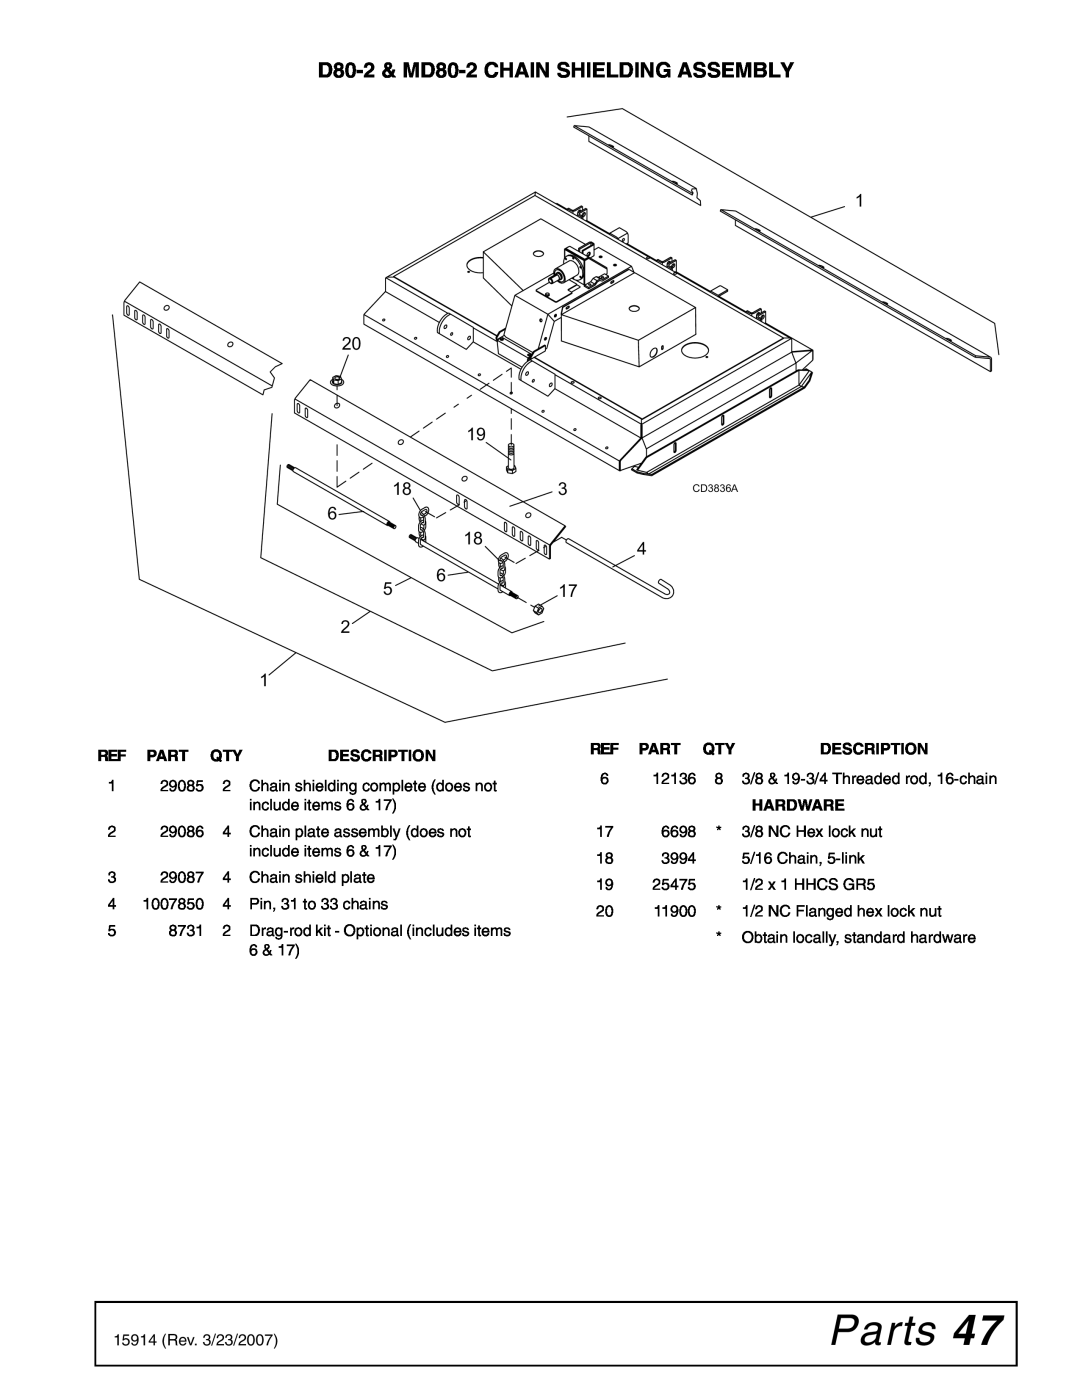 Woods Equipment manual Parts, D80-2& MD80-2CHAIN SHIELDING ASSEMBLY 